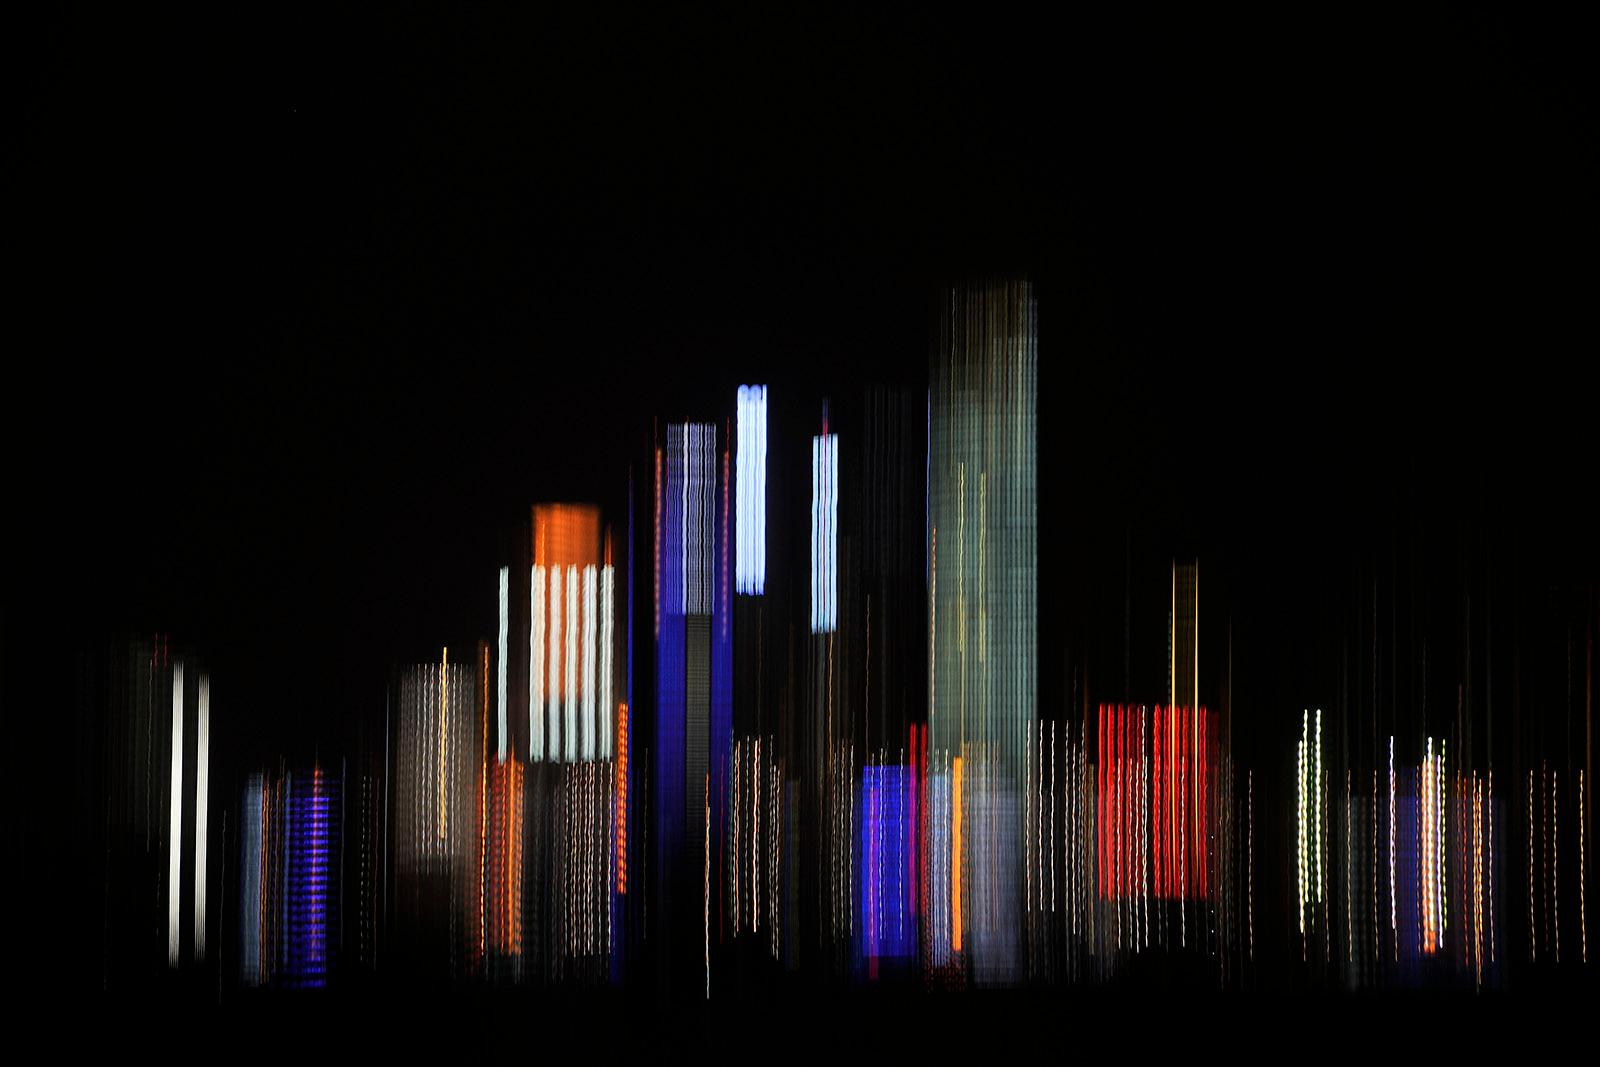 Michael Banks Abstract Photograph - Future city 1-Signed limited edition abstract print, Large format contemporary